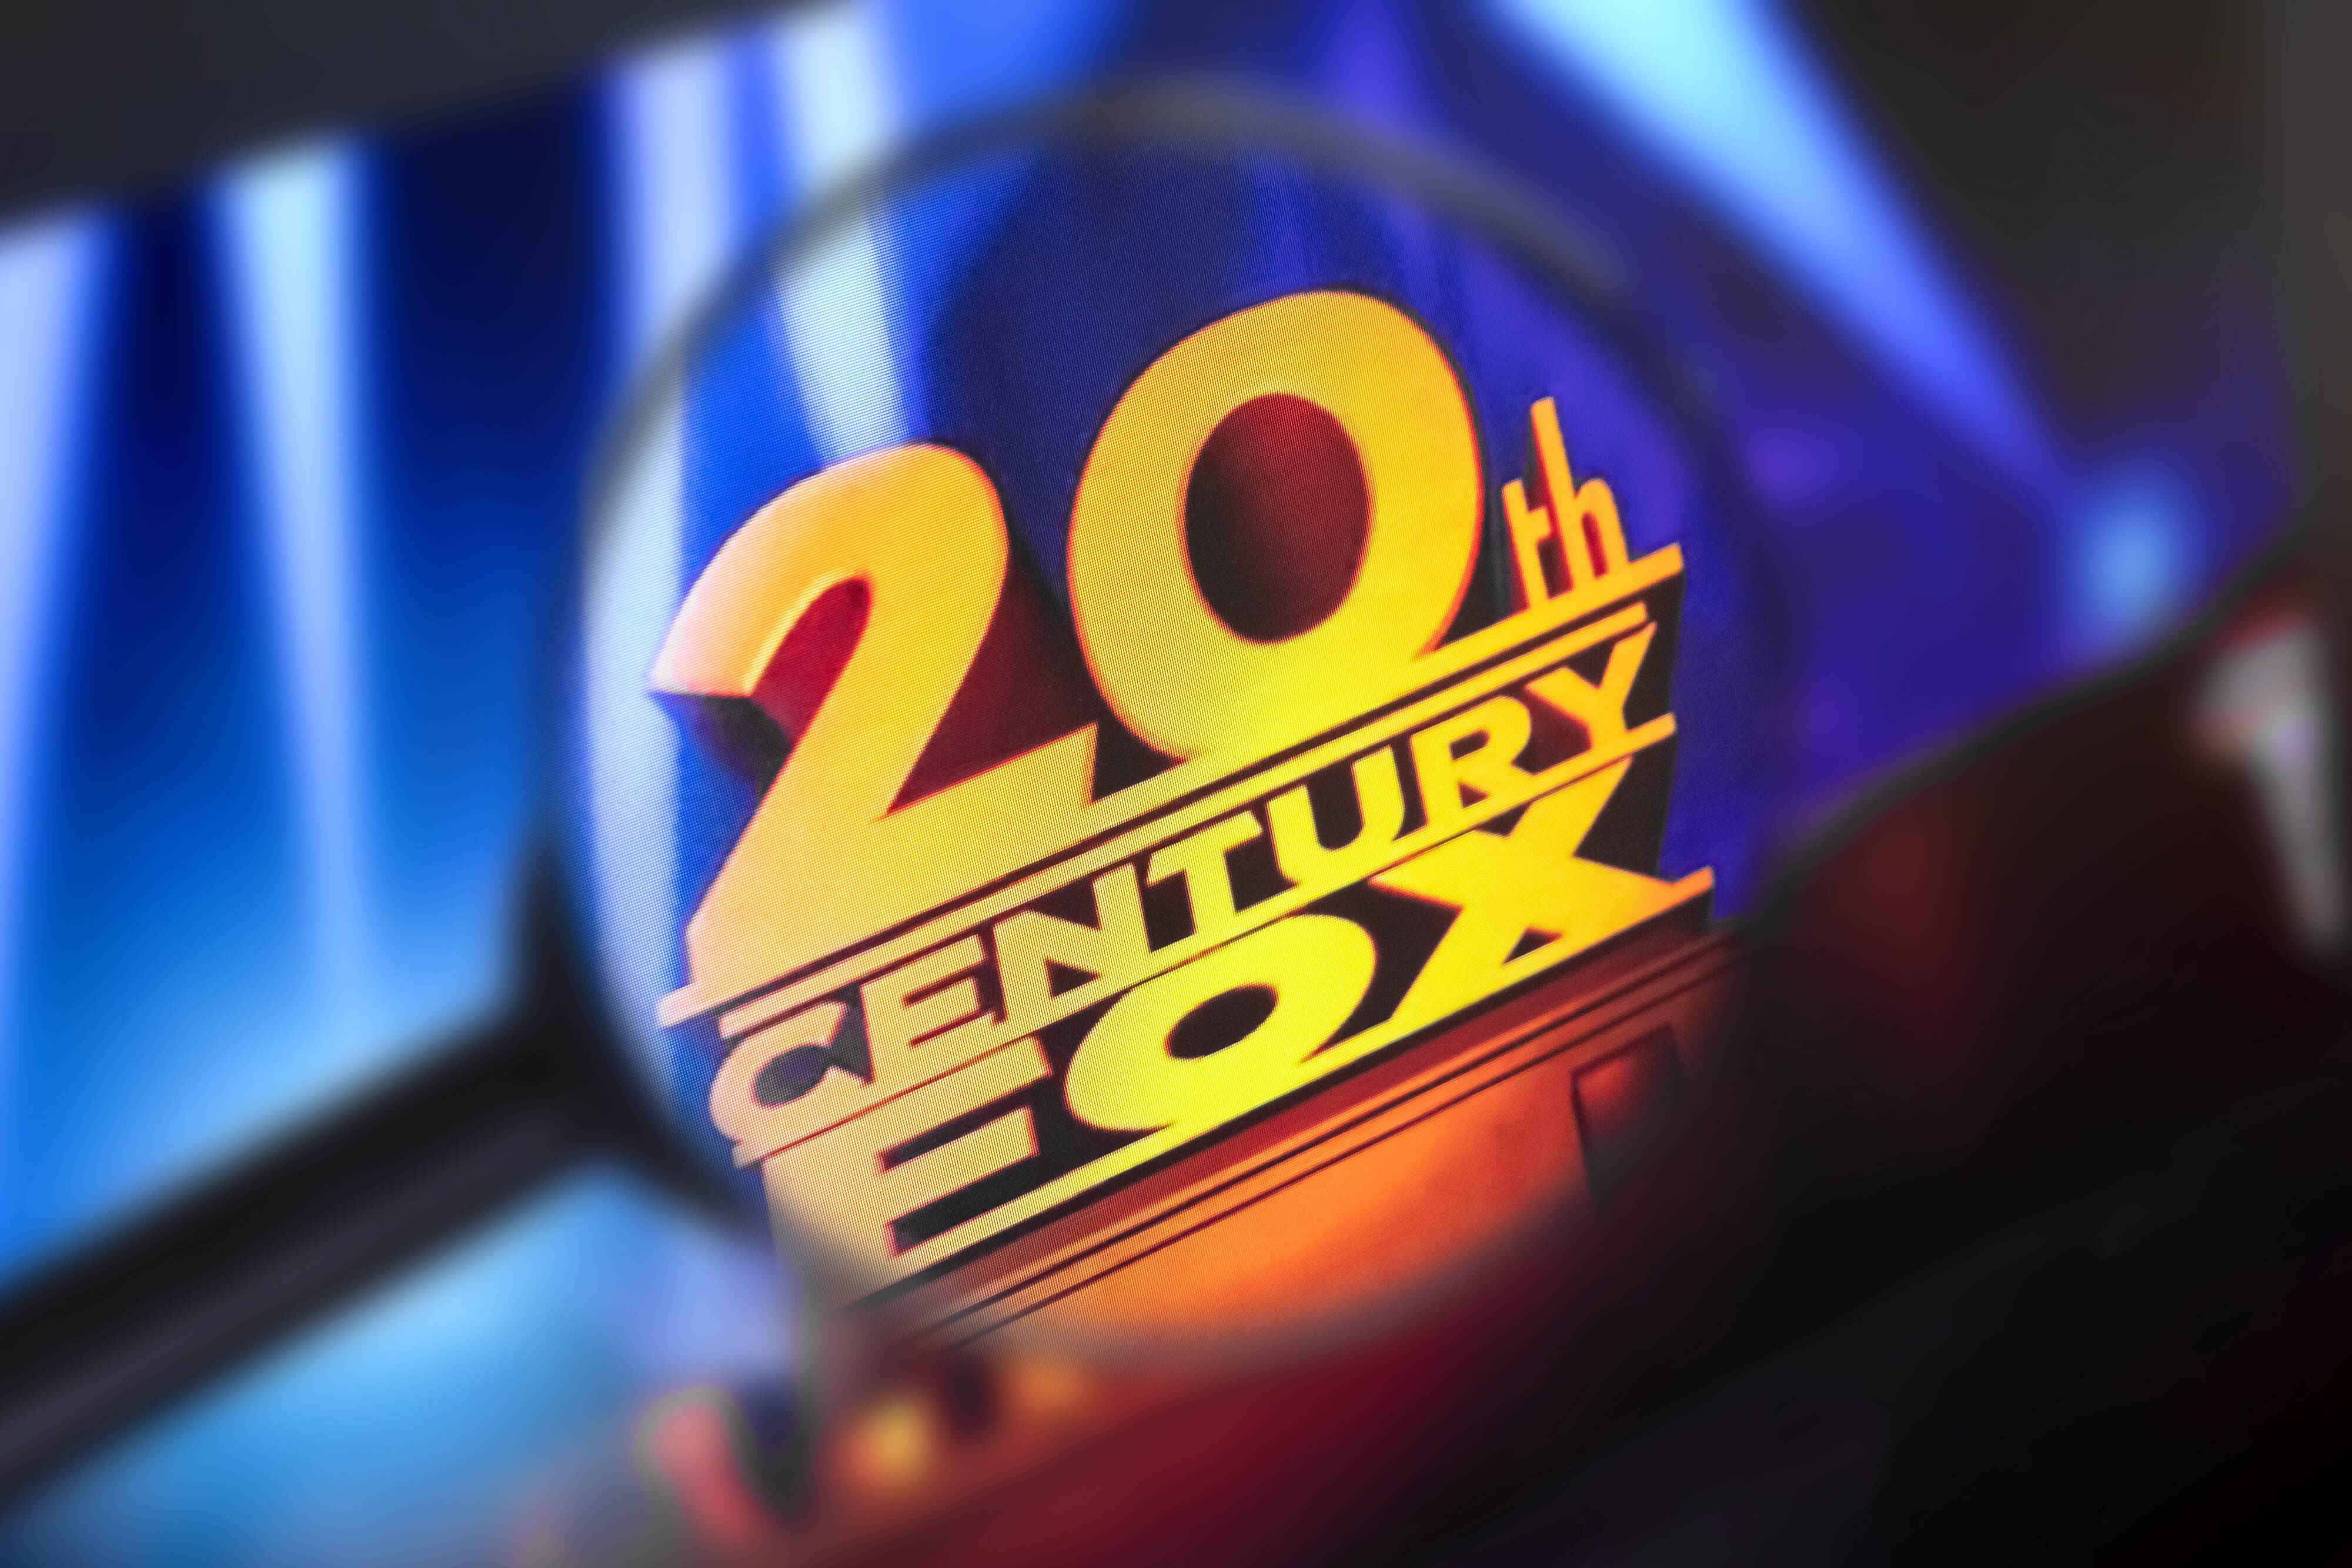 20th Century Fox  10 Movie Studio Logos and the Stories Behind